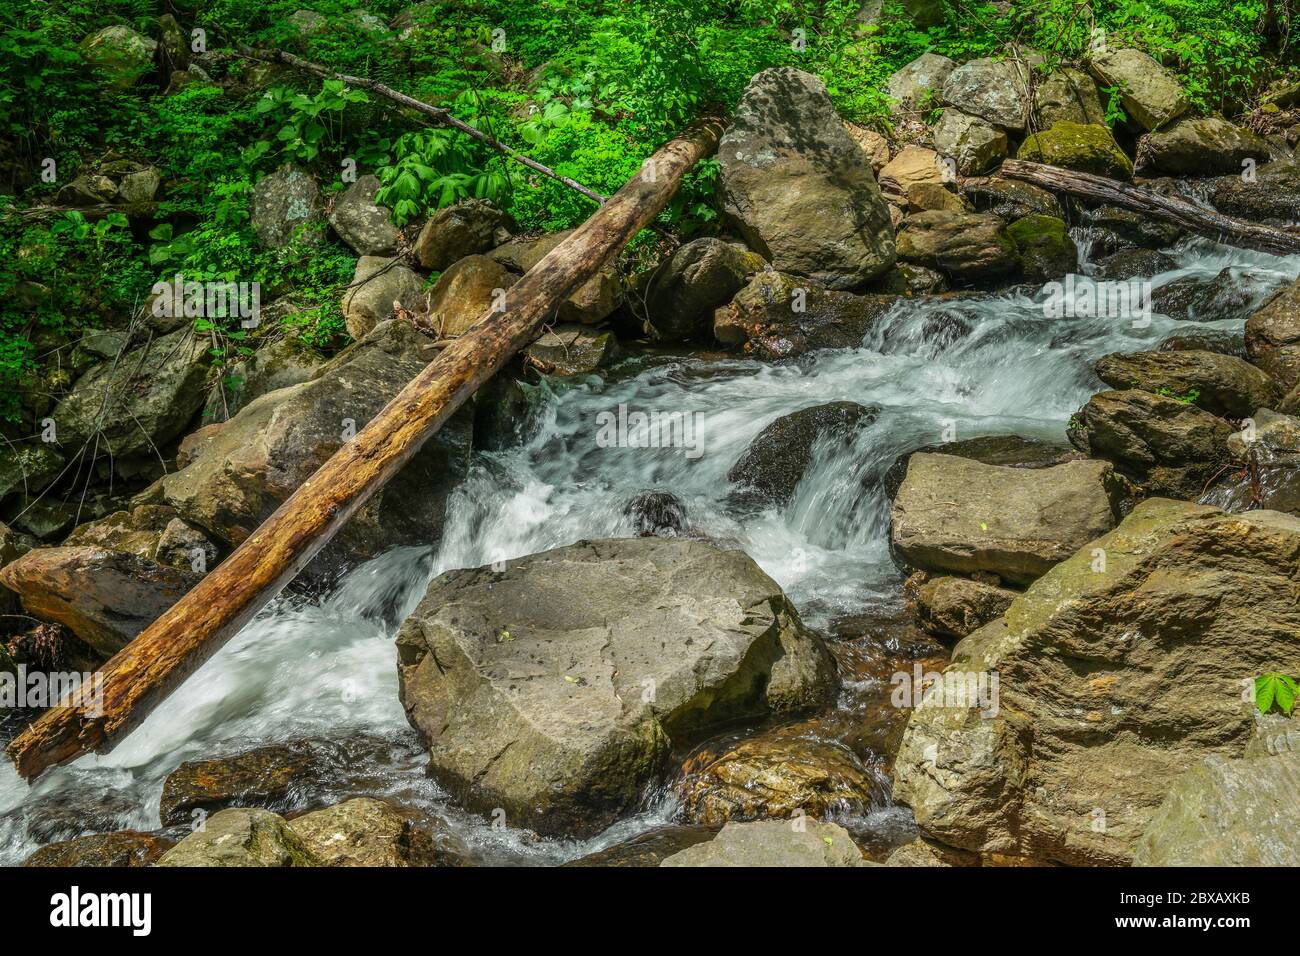 Water rushing downstream from the waterfall cascading through the rocks and boulders and flowing underneath the fallen tree log on a bright and sunny Stock Photo